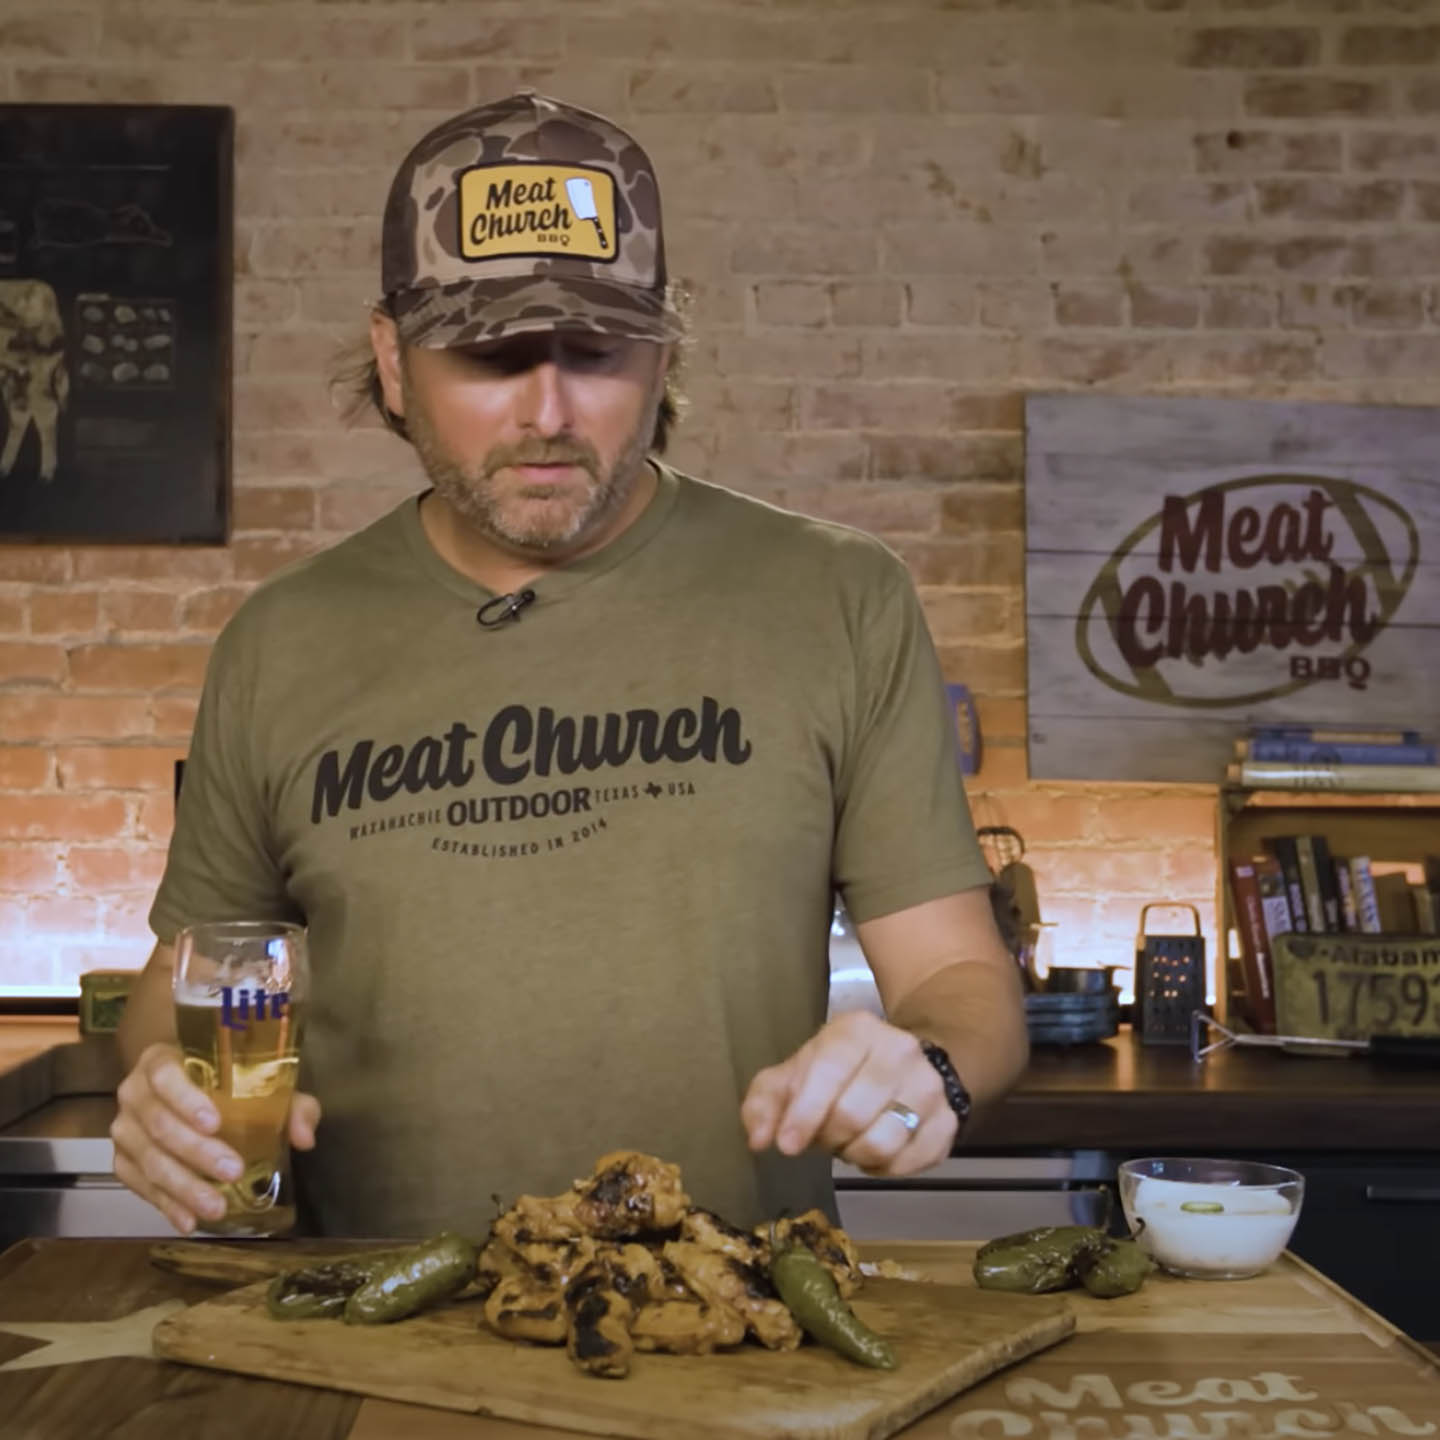 meatchurch hot wing recipes